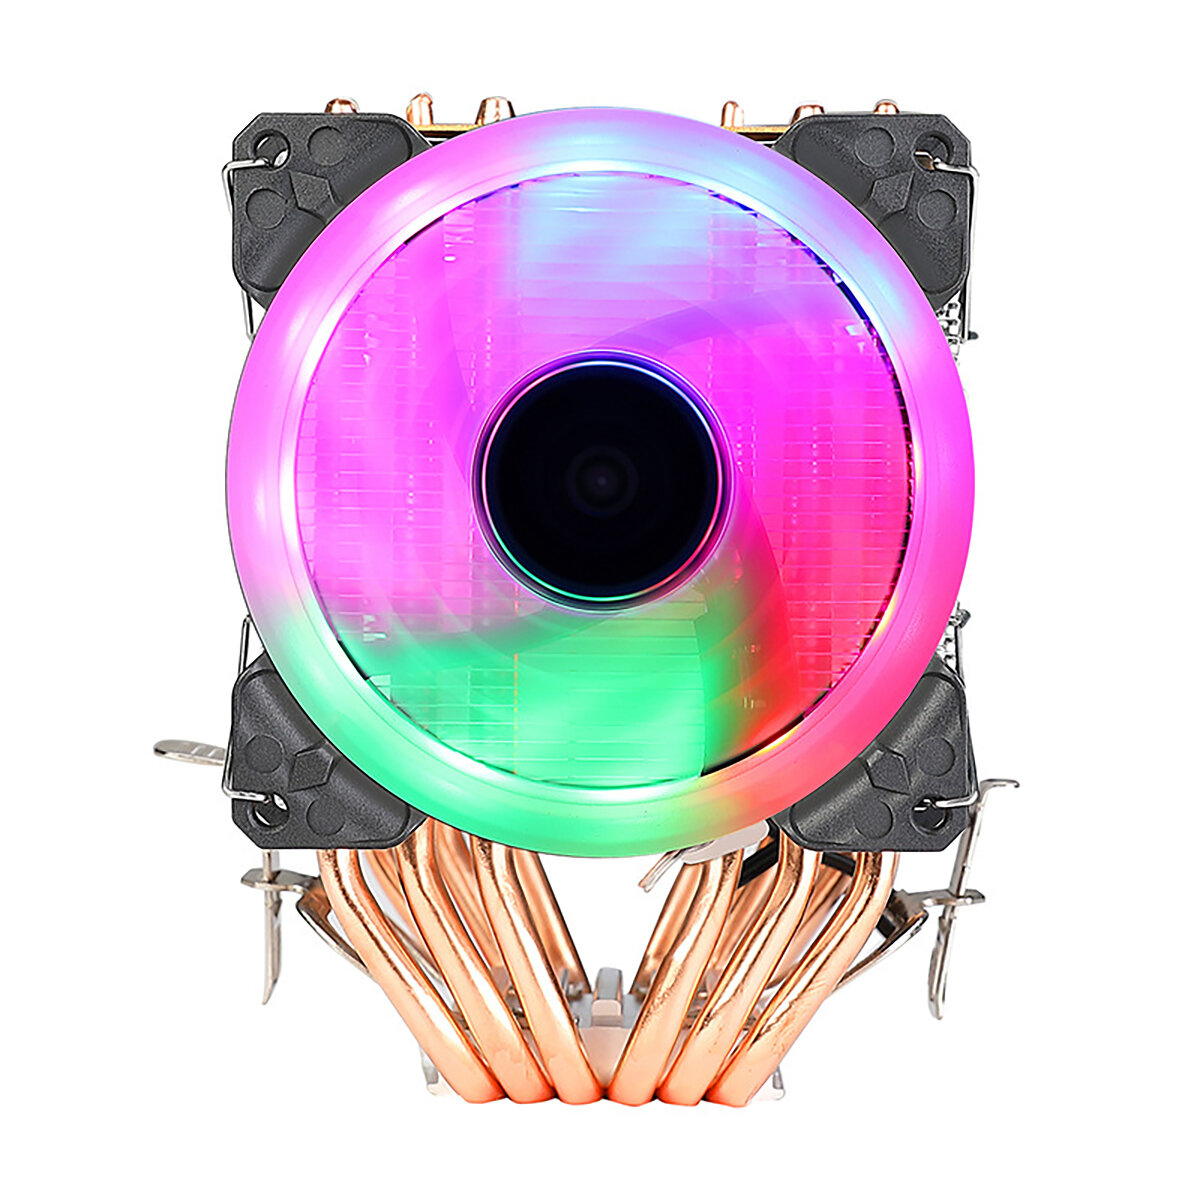 EVESKY CPU Cooling Fan 1/2/3 Fans 3/4 Pin 6 Heat Pipes RGB/Without Light Silent Computer Case Cooler